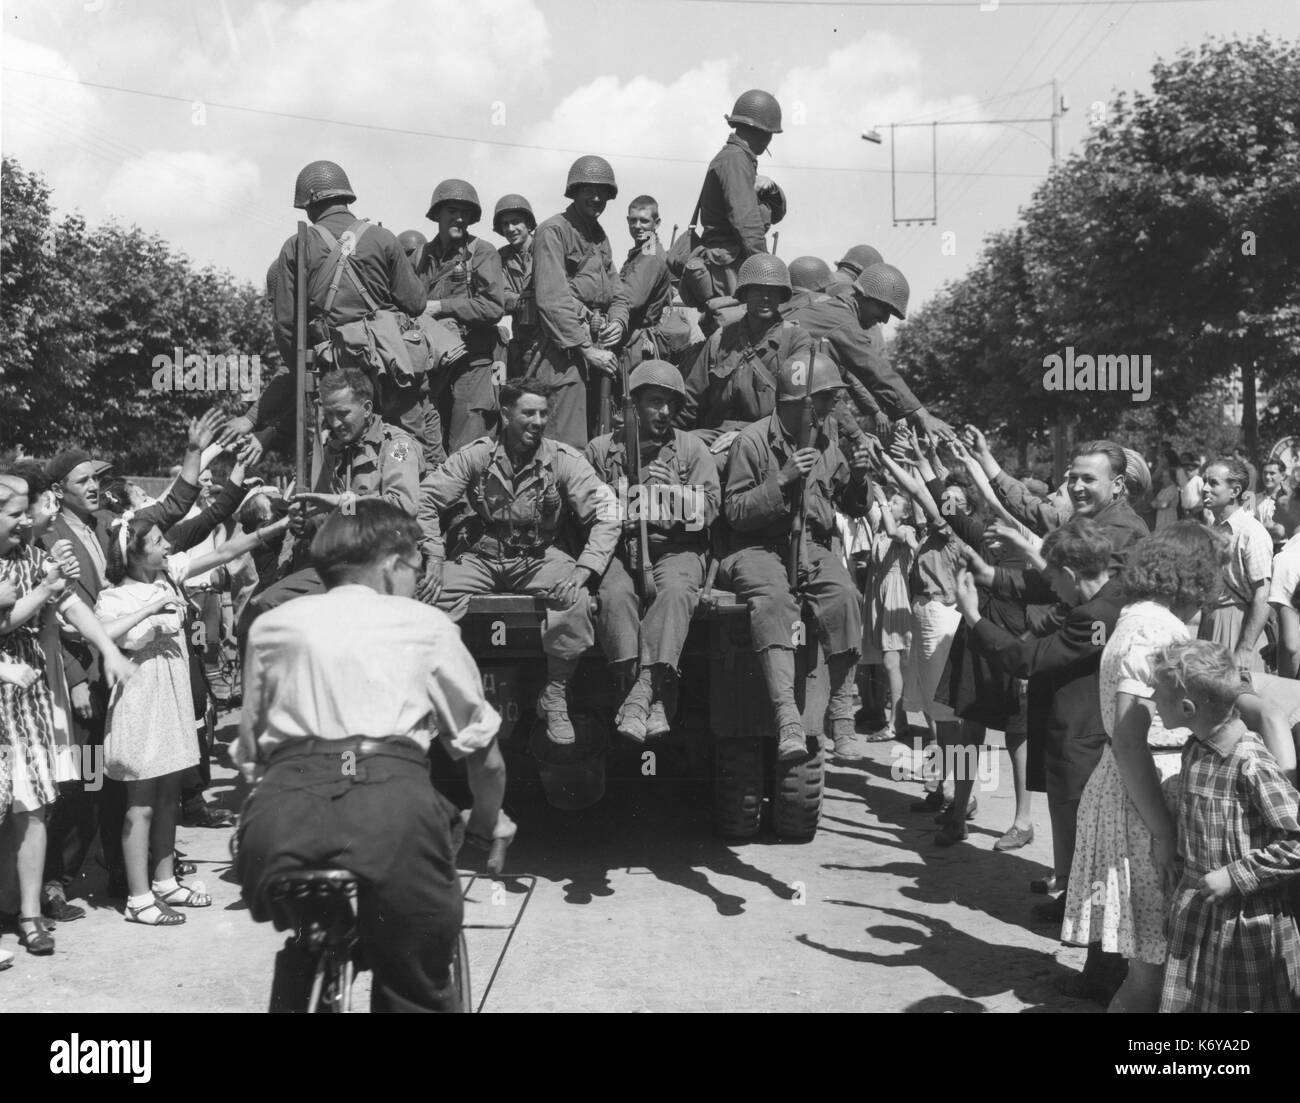 US Army troops are greeted by a jubilant crowd of liberated Parisians as they enter the city. Paris, France, 8/25/44. Stock Photo